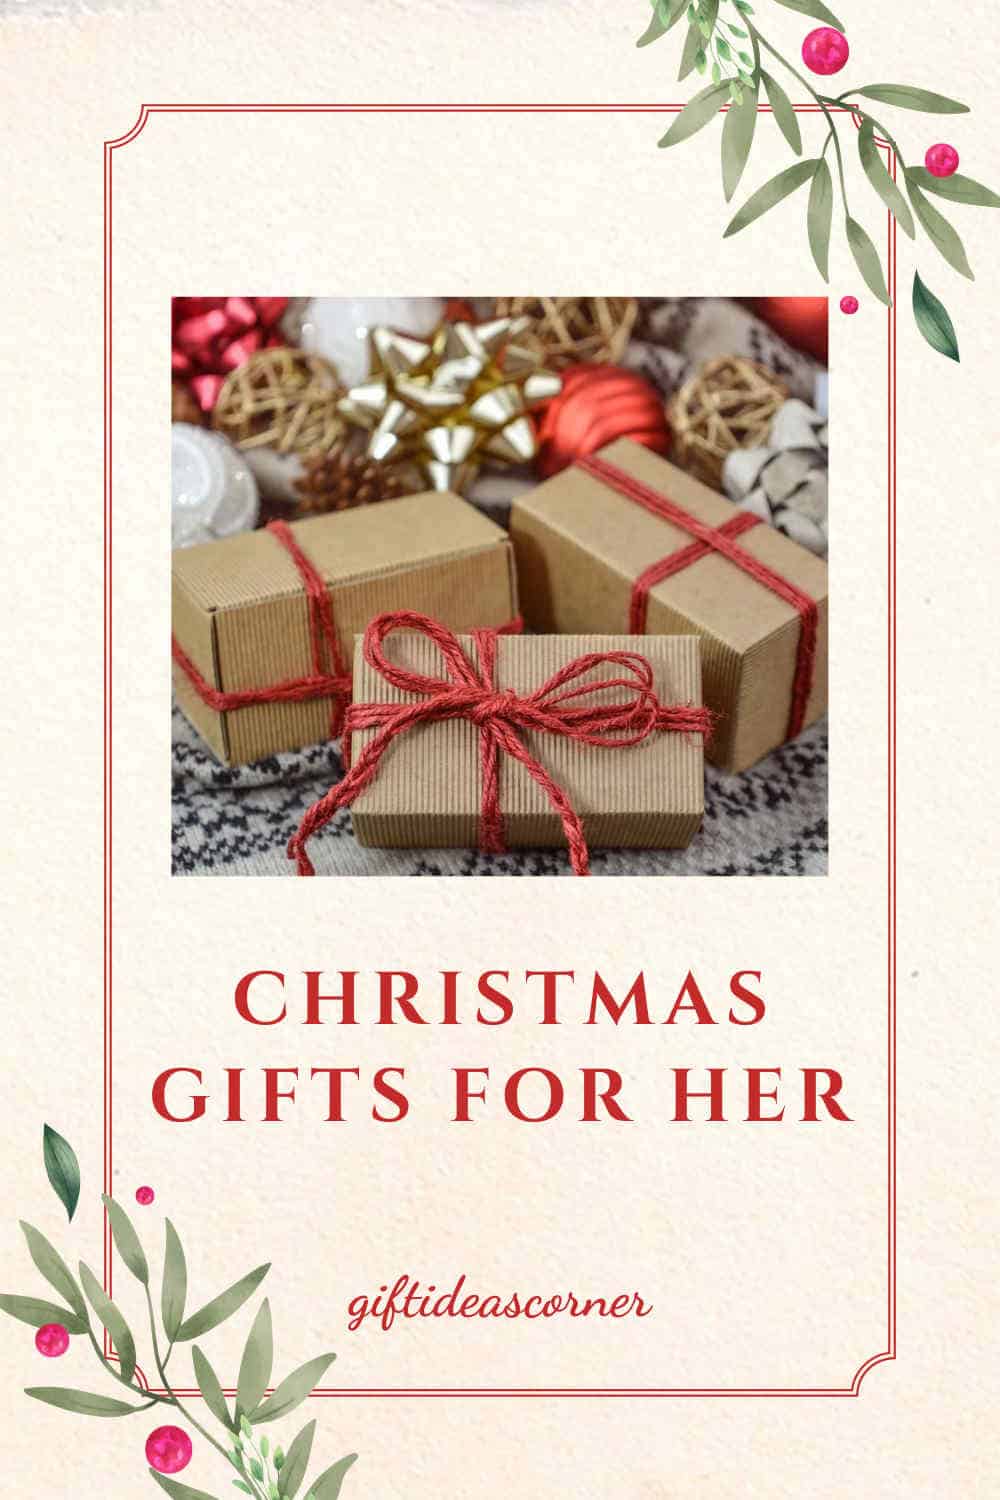 Don’t think of Christmas gifts for her as they are! The day is, after all, festive and freezing. Once you have taken this fact into consideration, the number of options you have will increase tremendously.